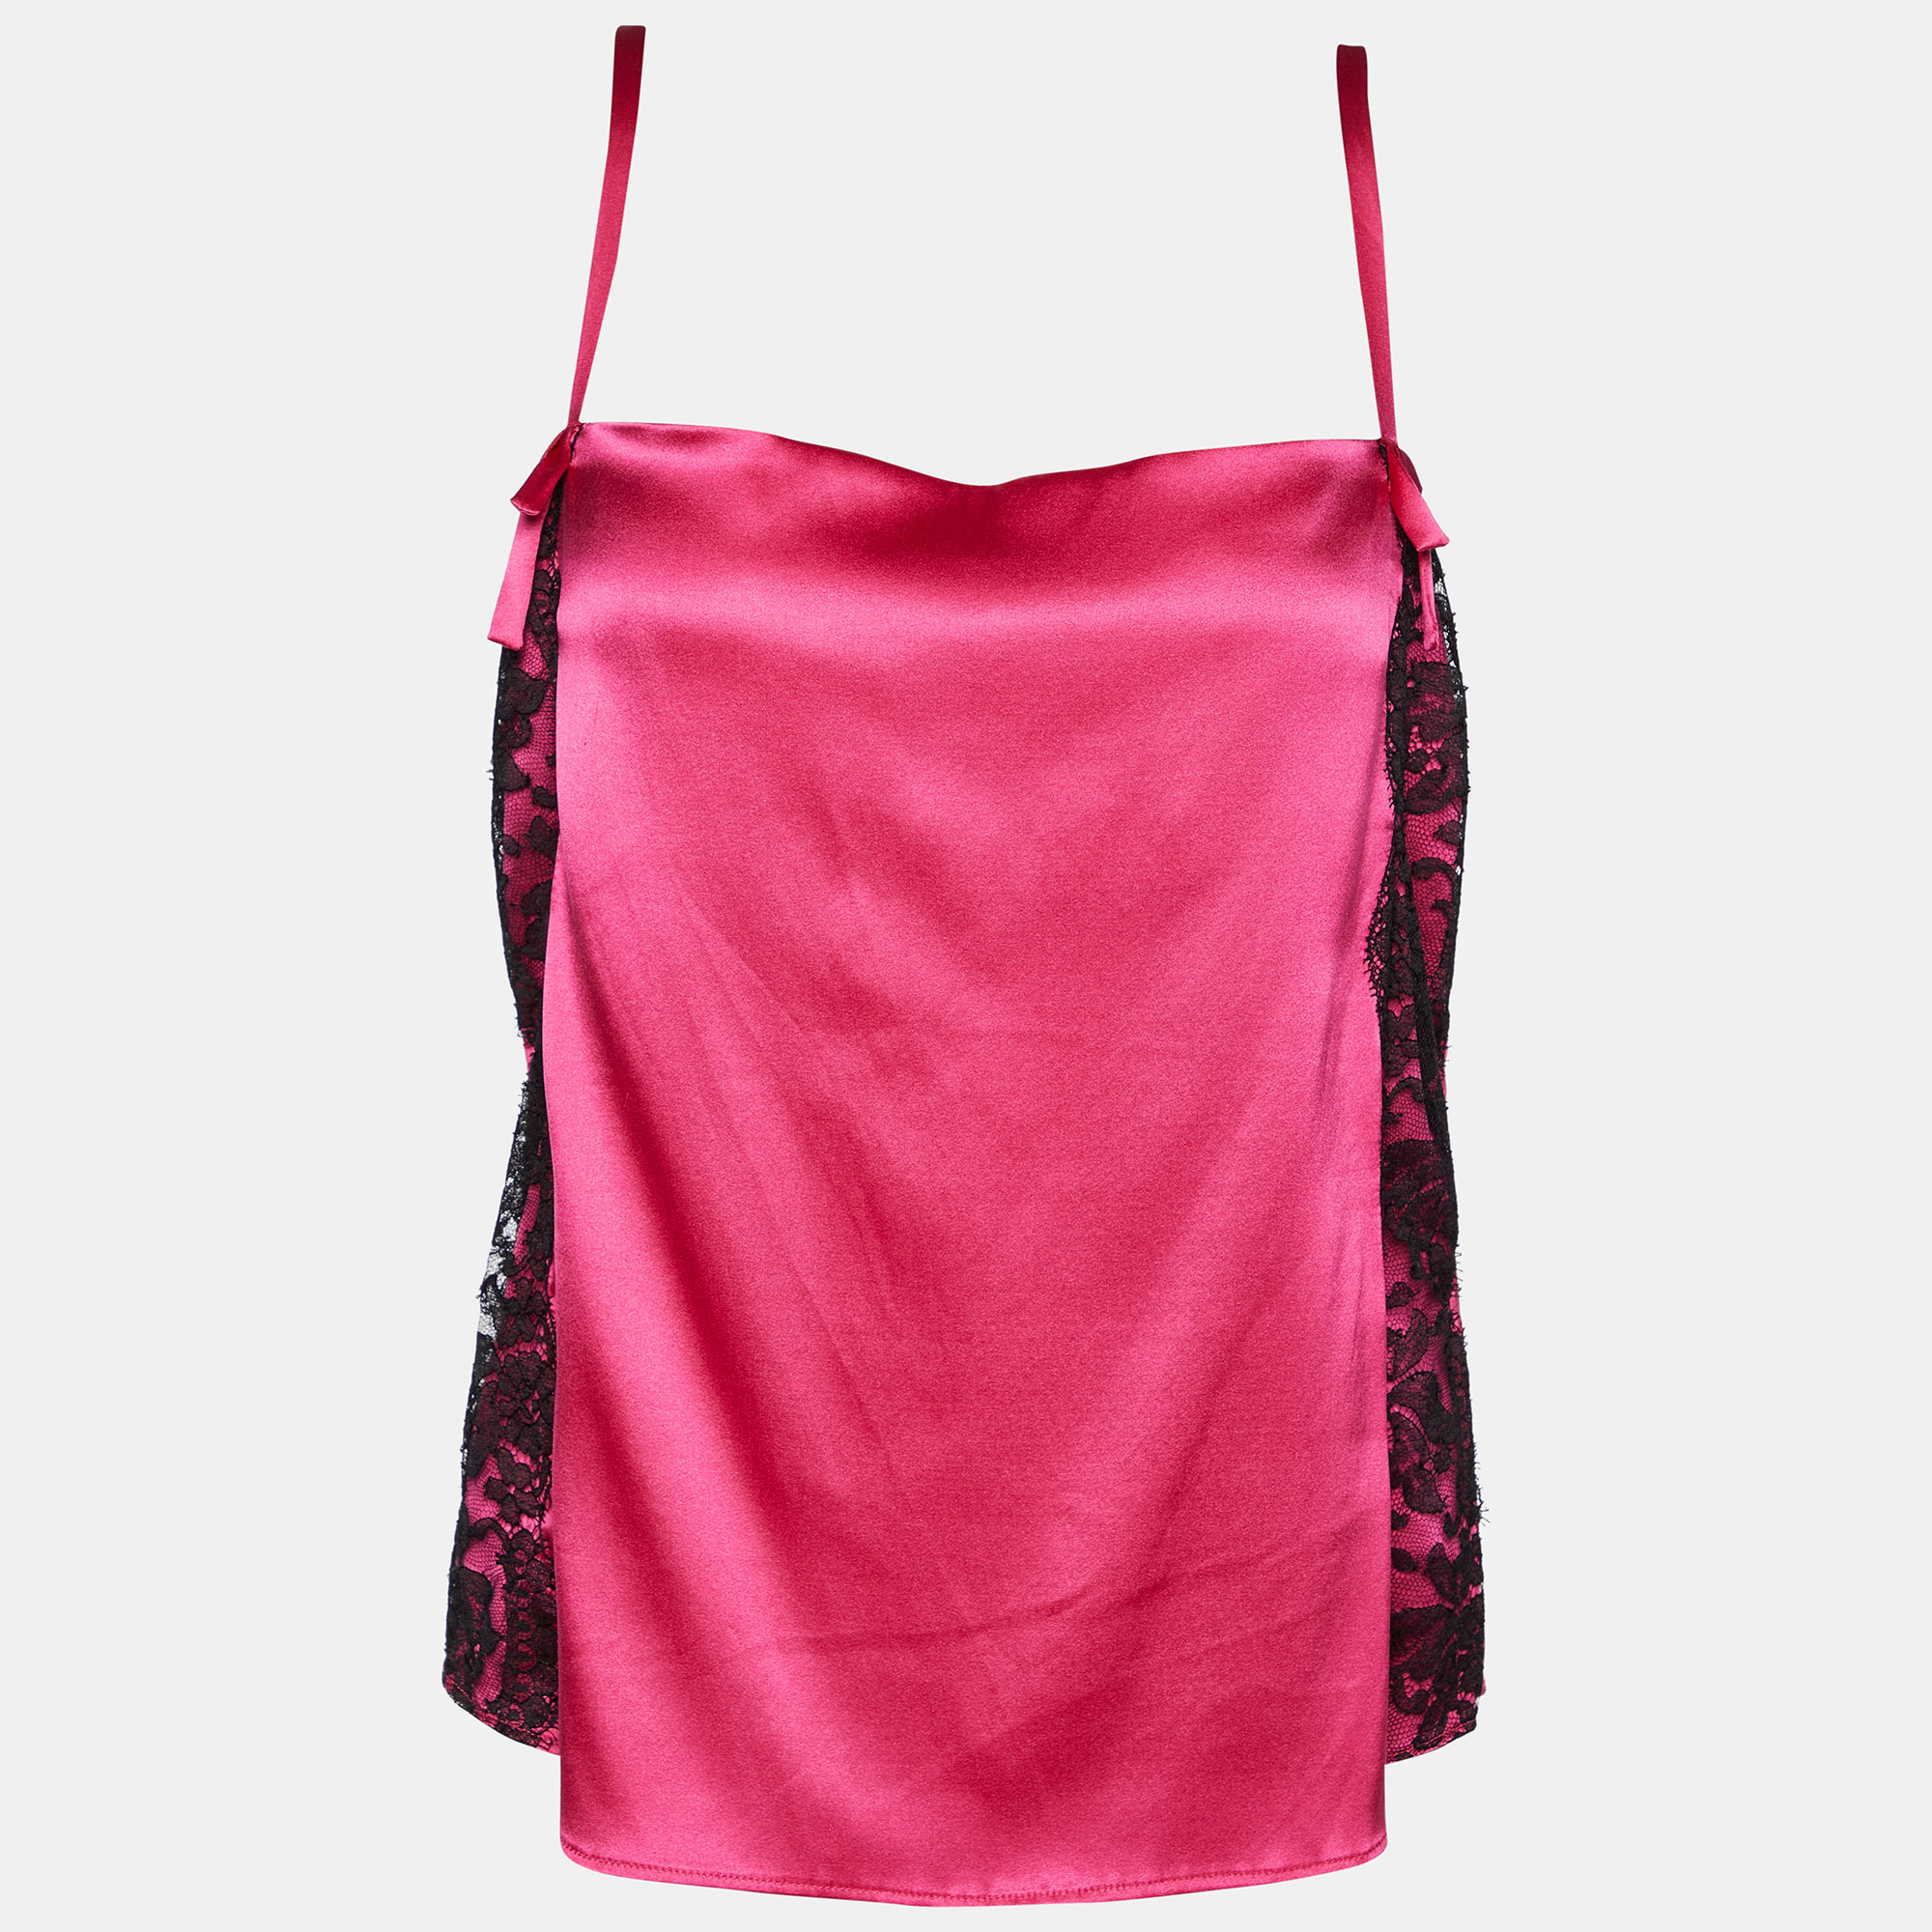 The D and G camisole is an exquisite lingerie piece featuring vibrant fuschia pink silk satin with delicate lace detailing. Its elegant design offers a sensuous and luxurious feel making it a perfect choice for intimate occasions.